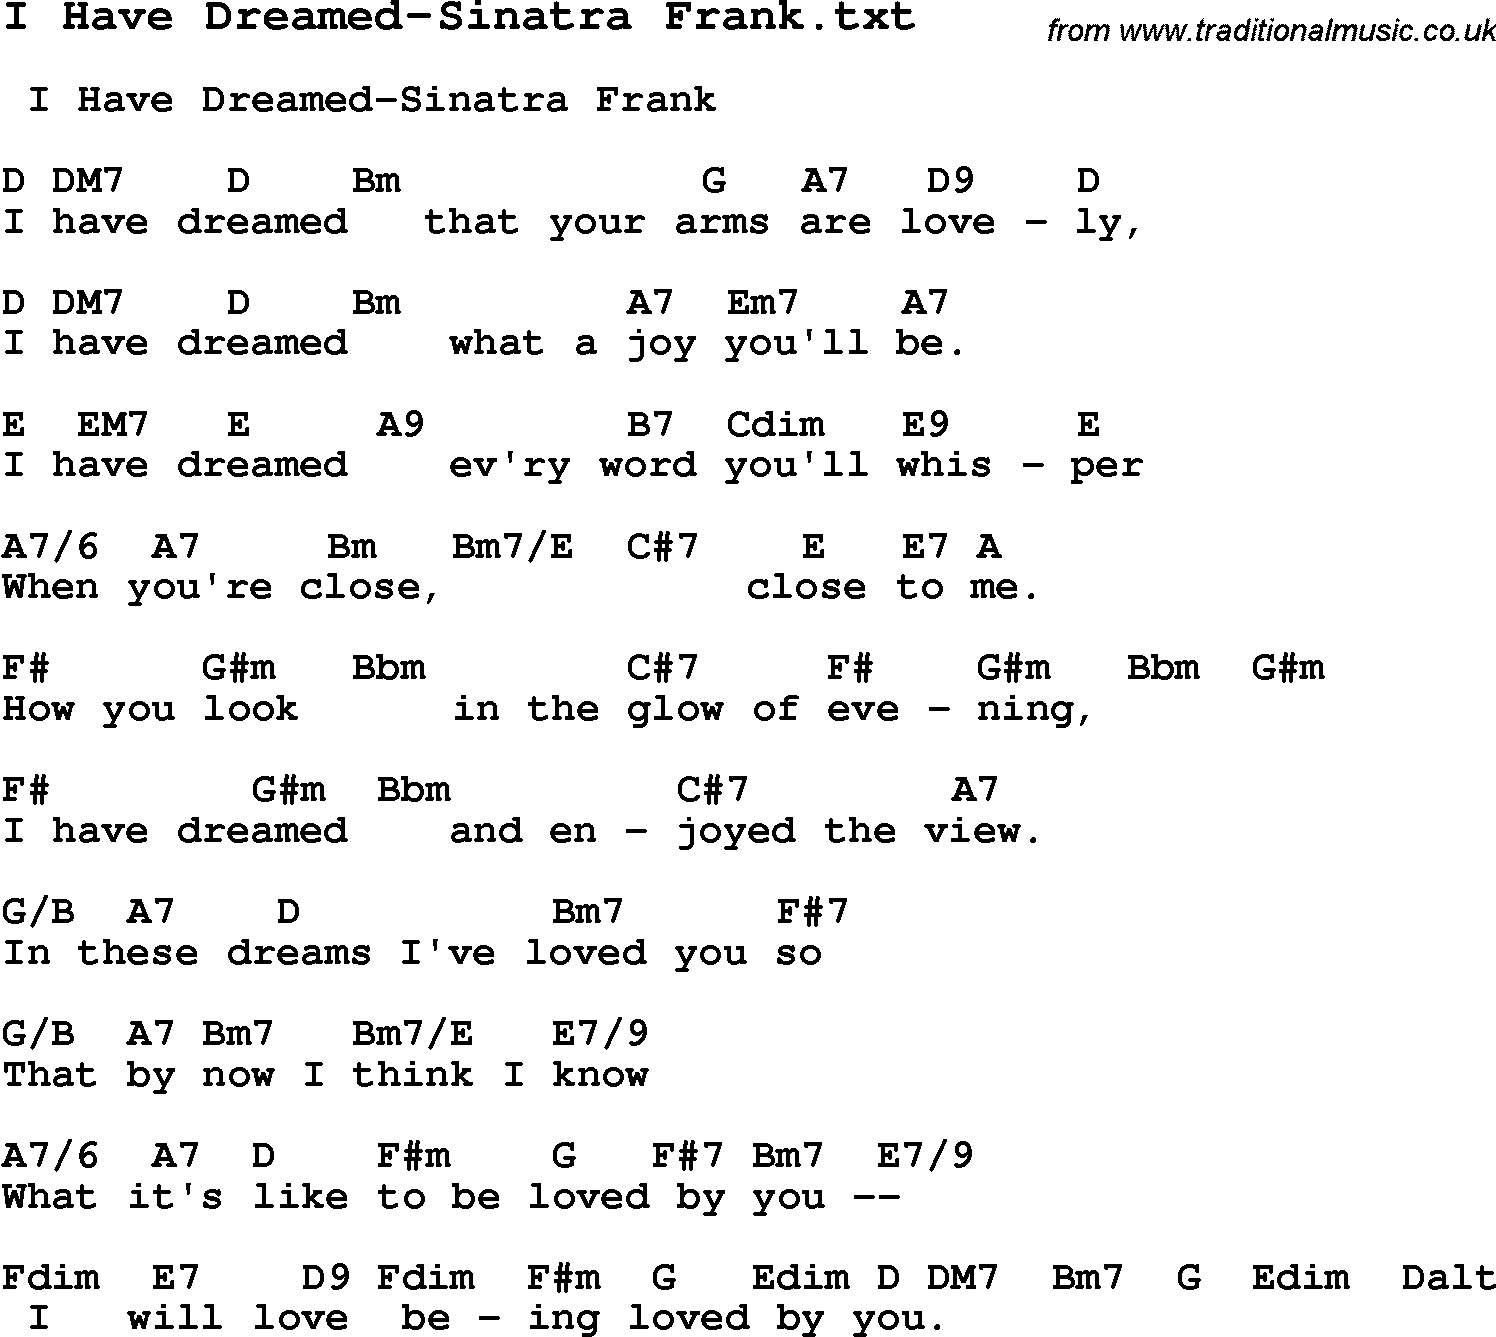 Jazz Song from top bands and vocal artists with chords, tabs and lyrics - I Have Dreamed-Sinatra Frank